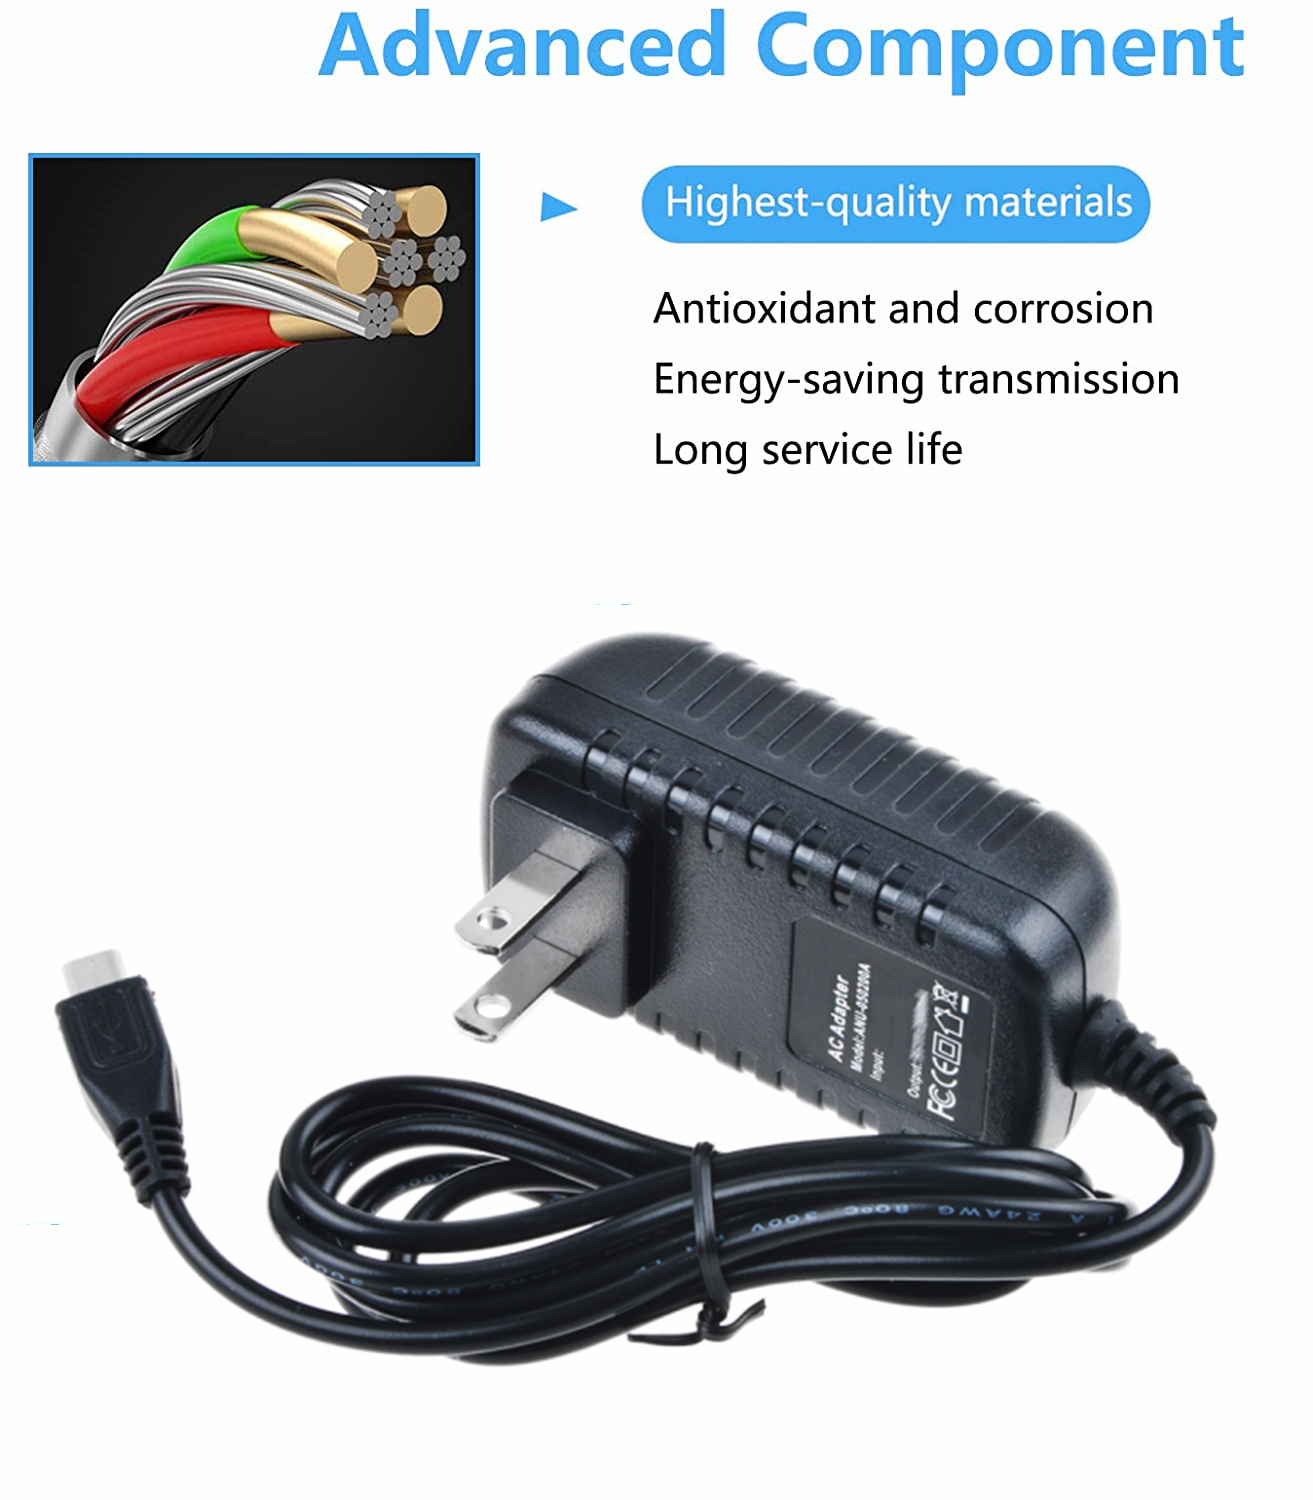 KONKIN BOO Compatible N 5V 2A Micro USB AC/DC Adapter Replacement for Craig CMP 770 CMP 765 CMP770 CMP765 Android Tablet PC iCraig 5VDC 2000mA Power Supply Cord Cable PS Battery Charger Mains PSU - image 2 of 5